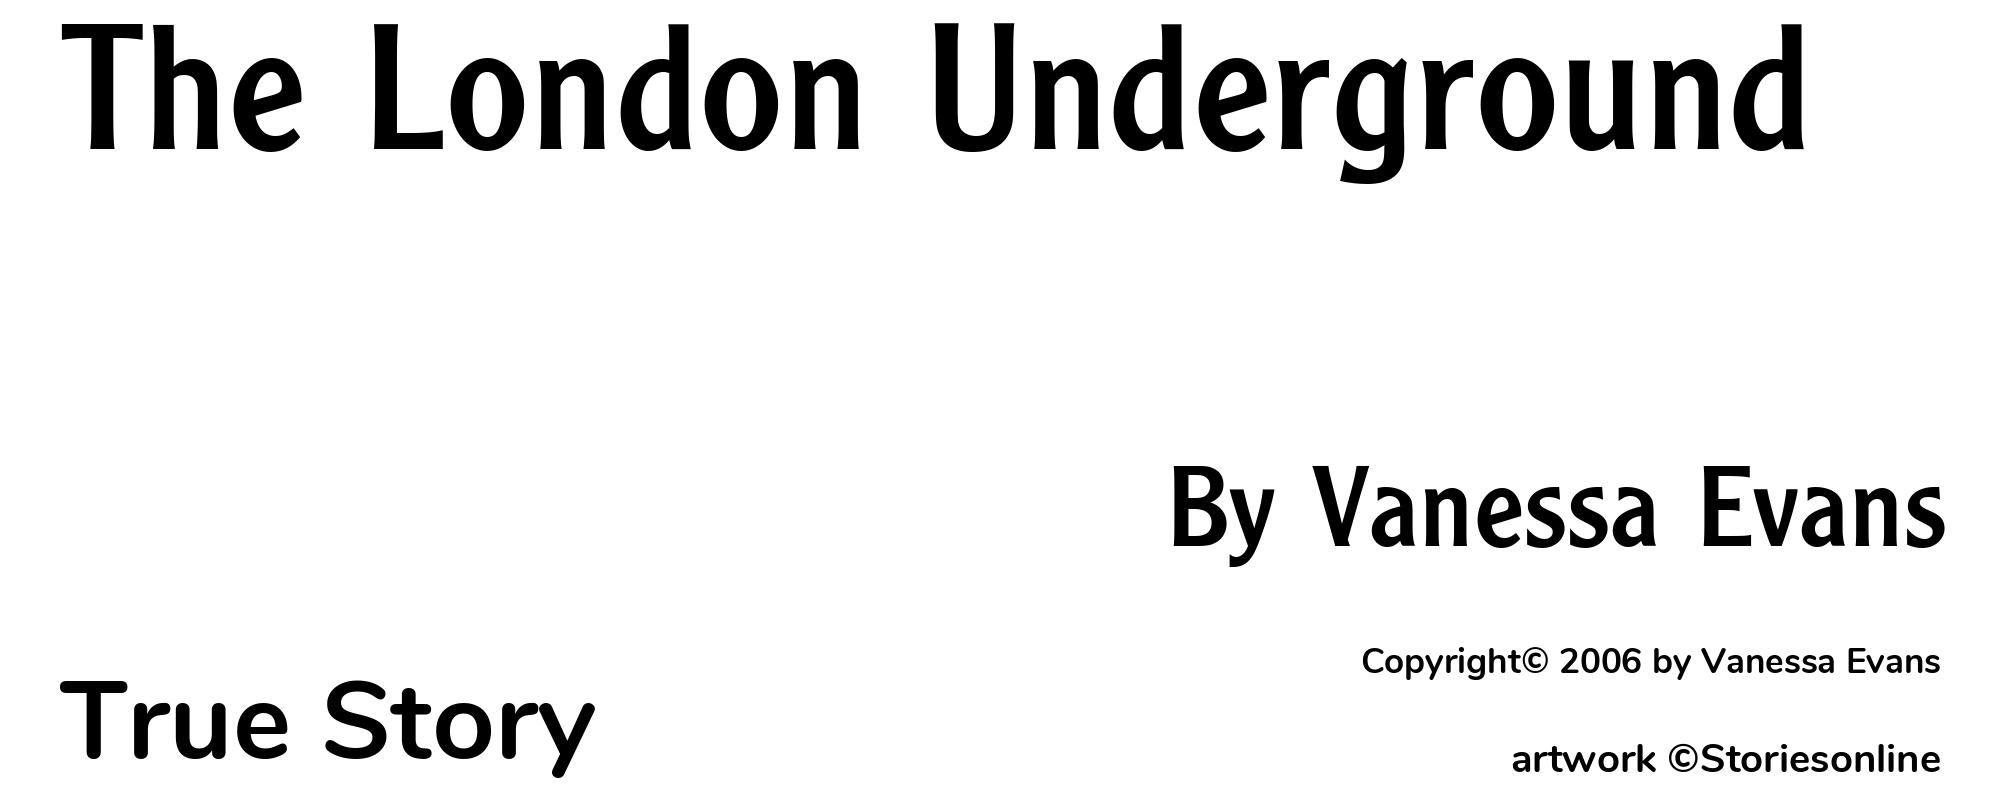 The London Underground - Cover